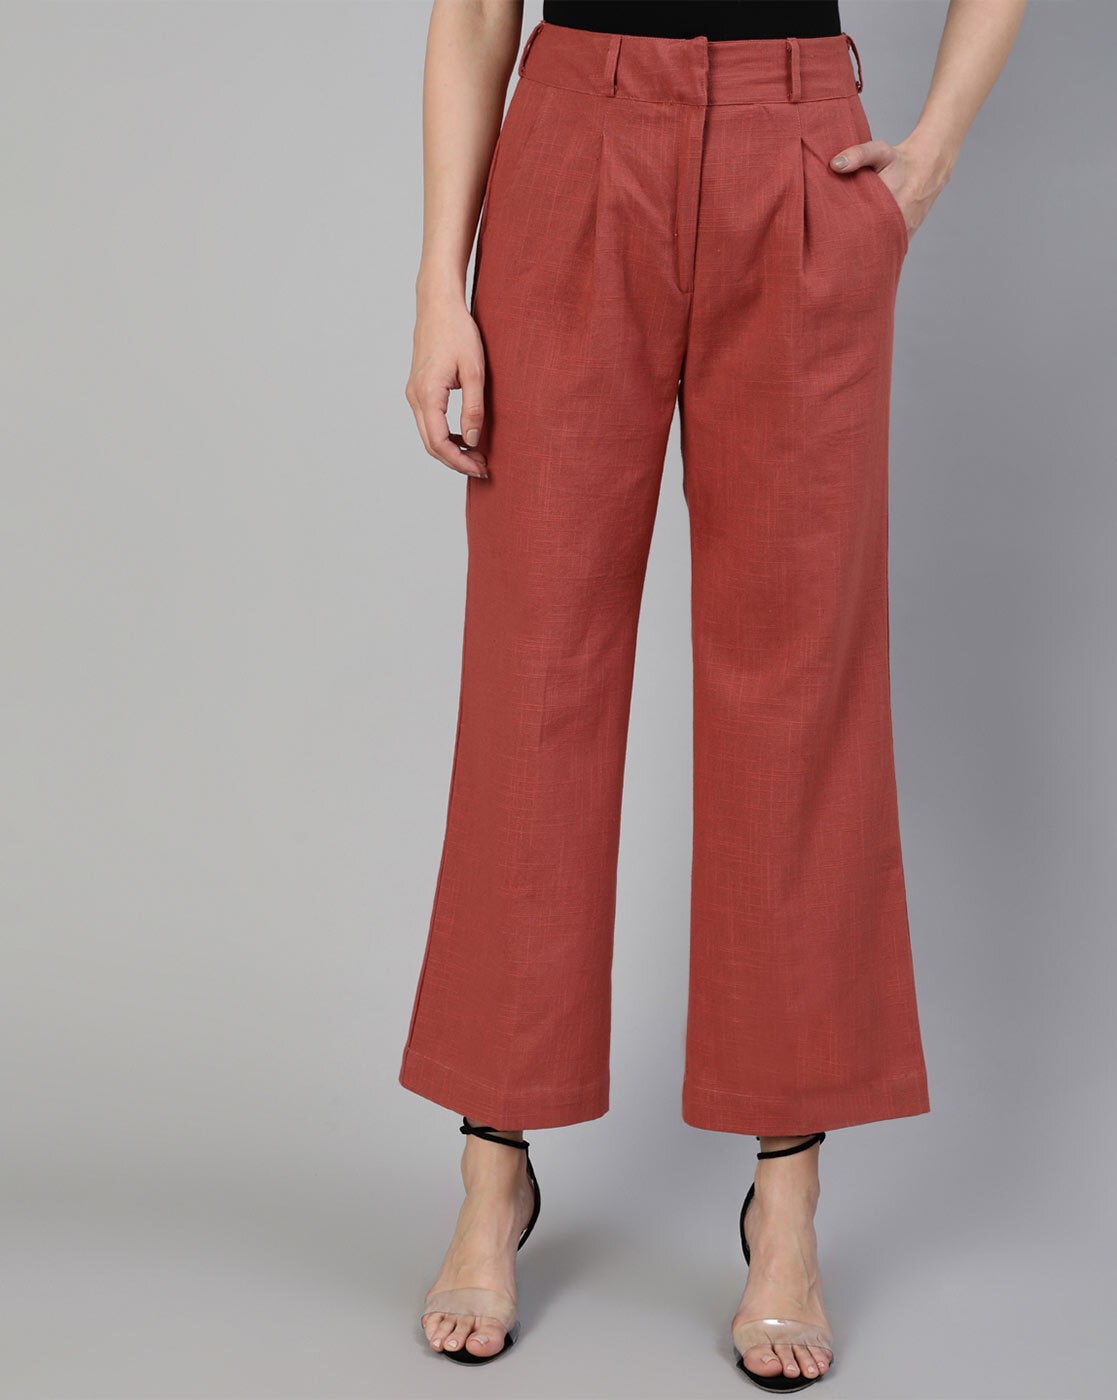 Express | High Waisted Sash Waist Wide Leg Pant In Red | Express Style Trial